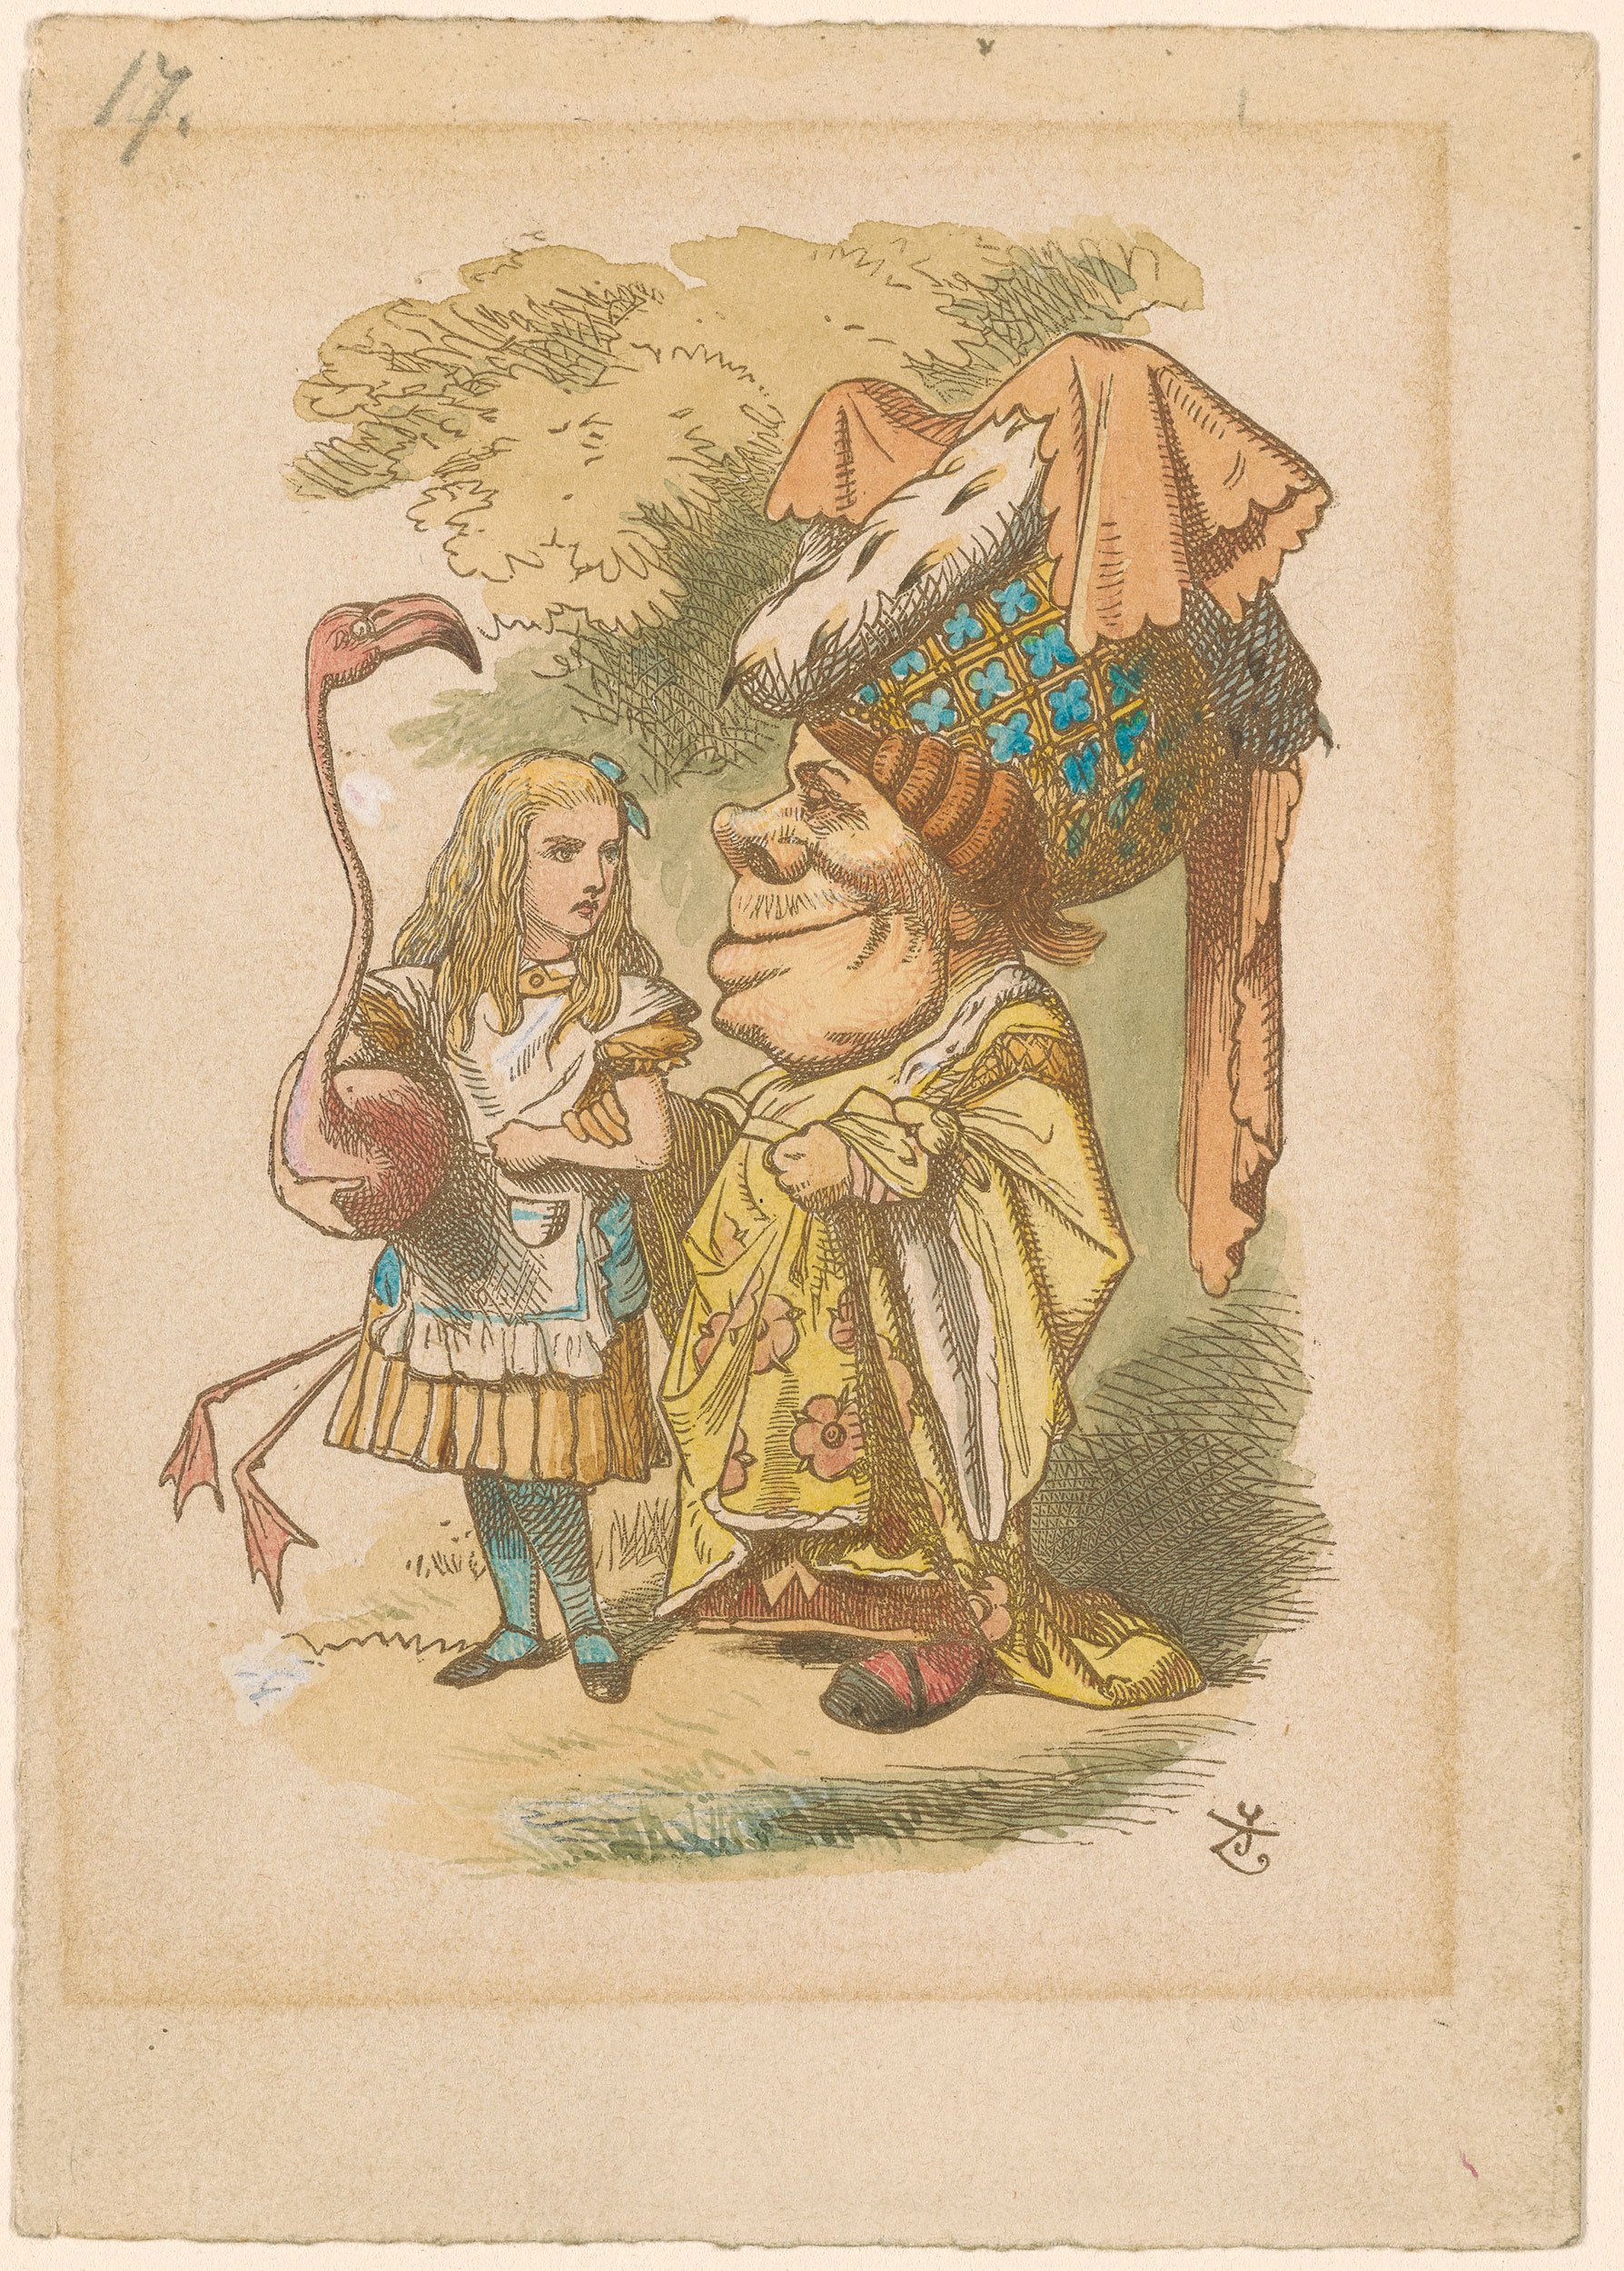 A book illustration showing Alice as a young child with a pink flamingo in hand and a large headed, short, oddly dressed man standing next to her.